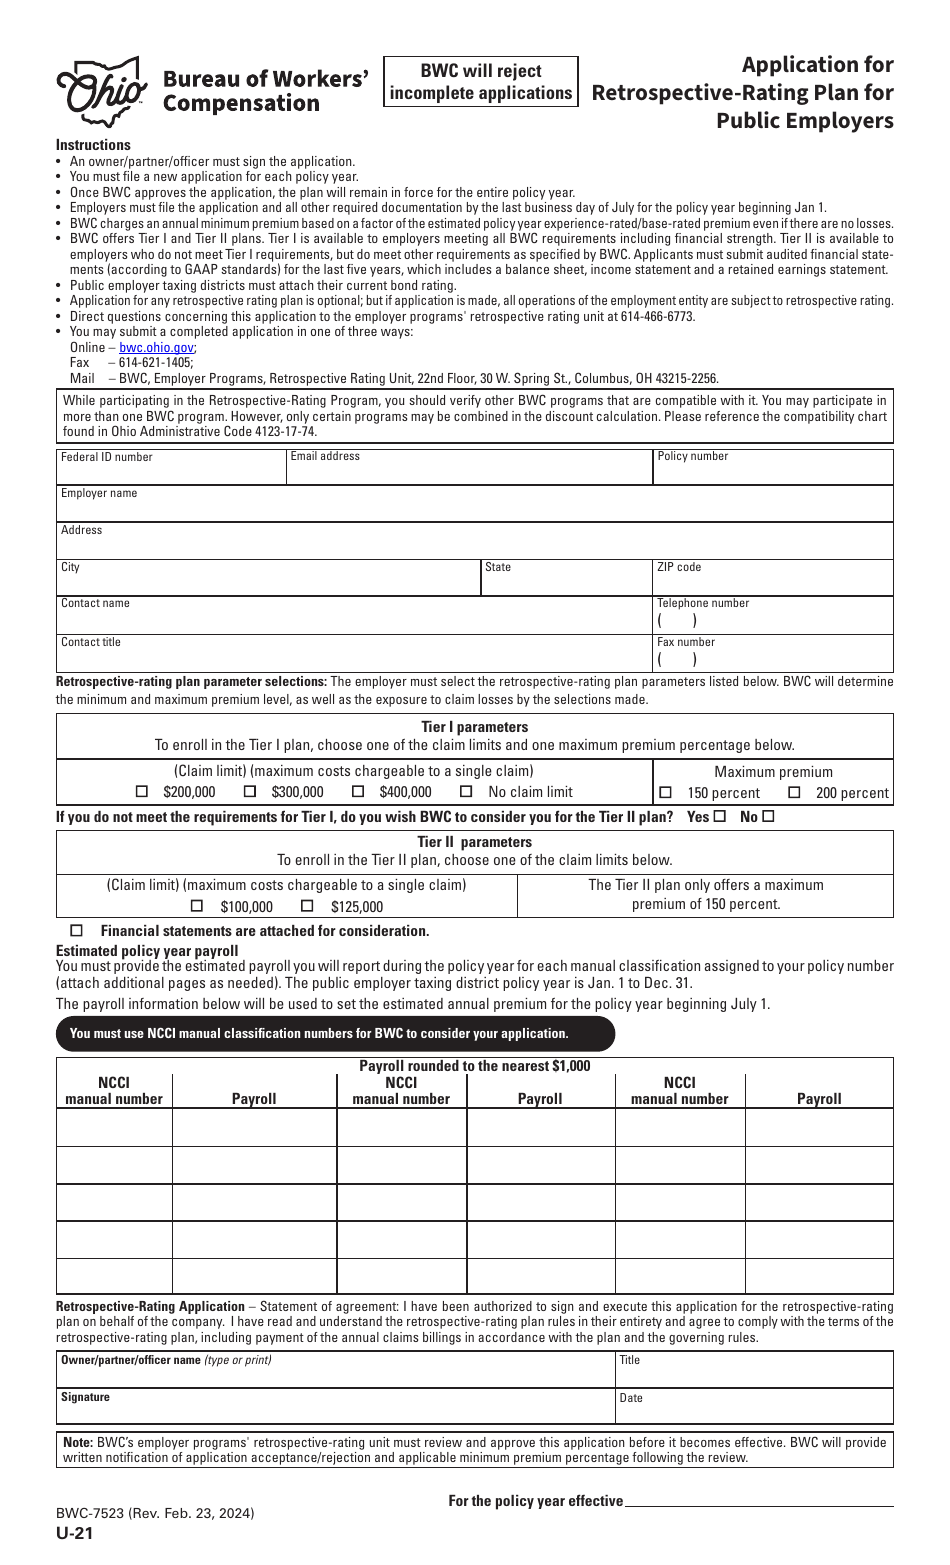 Form U-21 (BWC-7523) Application for Retrospective-Rating Plan for Public Employers - Ohio, Page 1